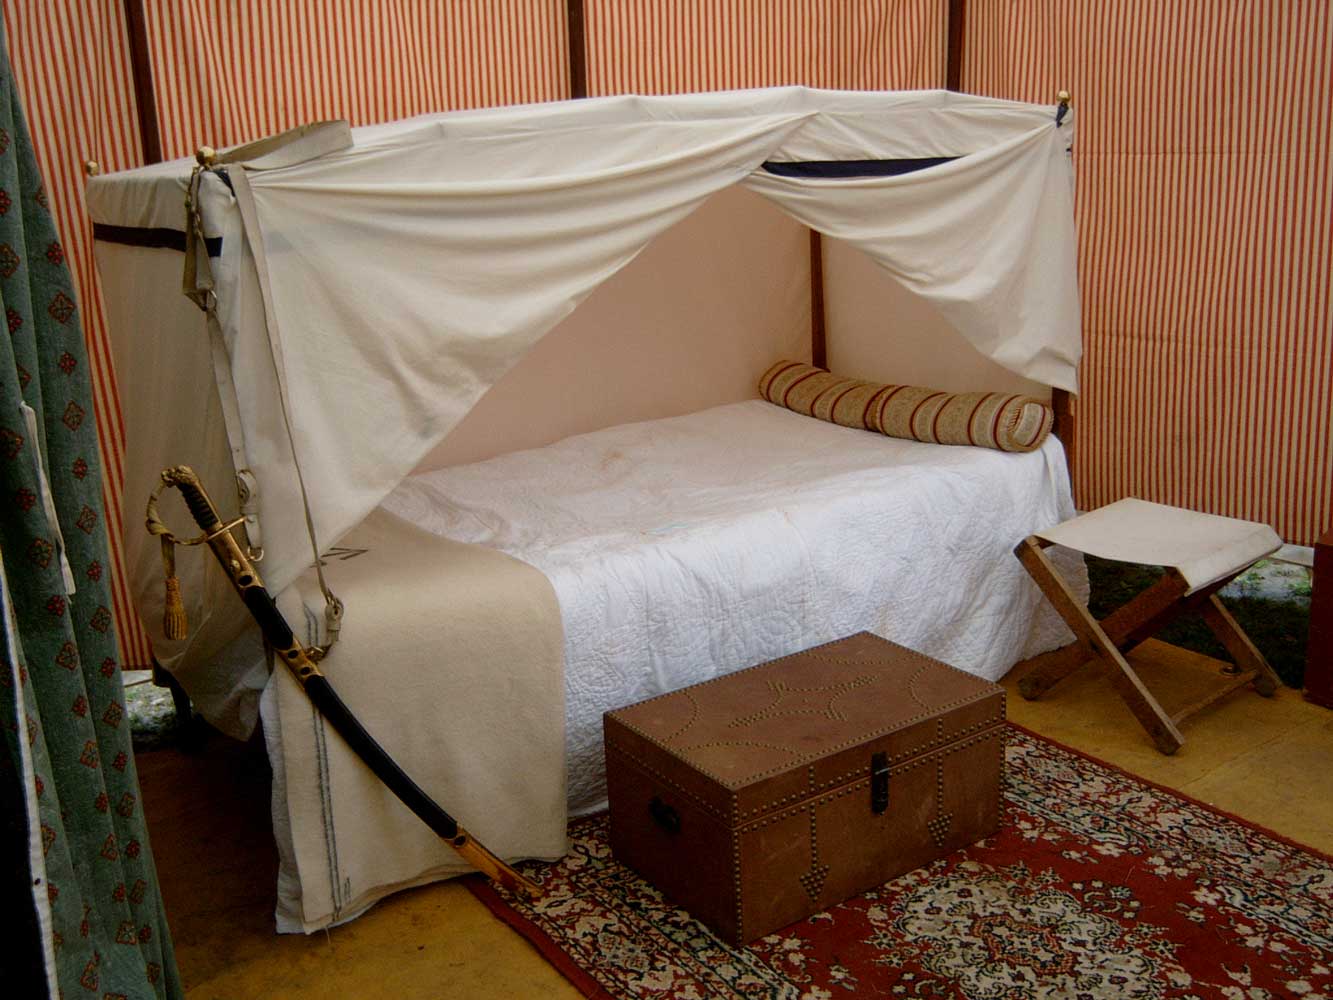 General's Folding Campaign Bed